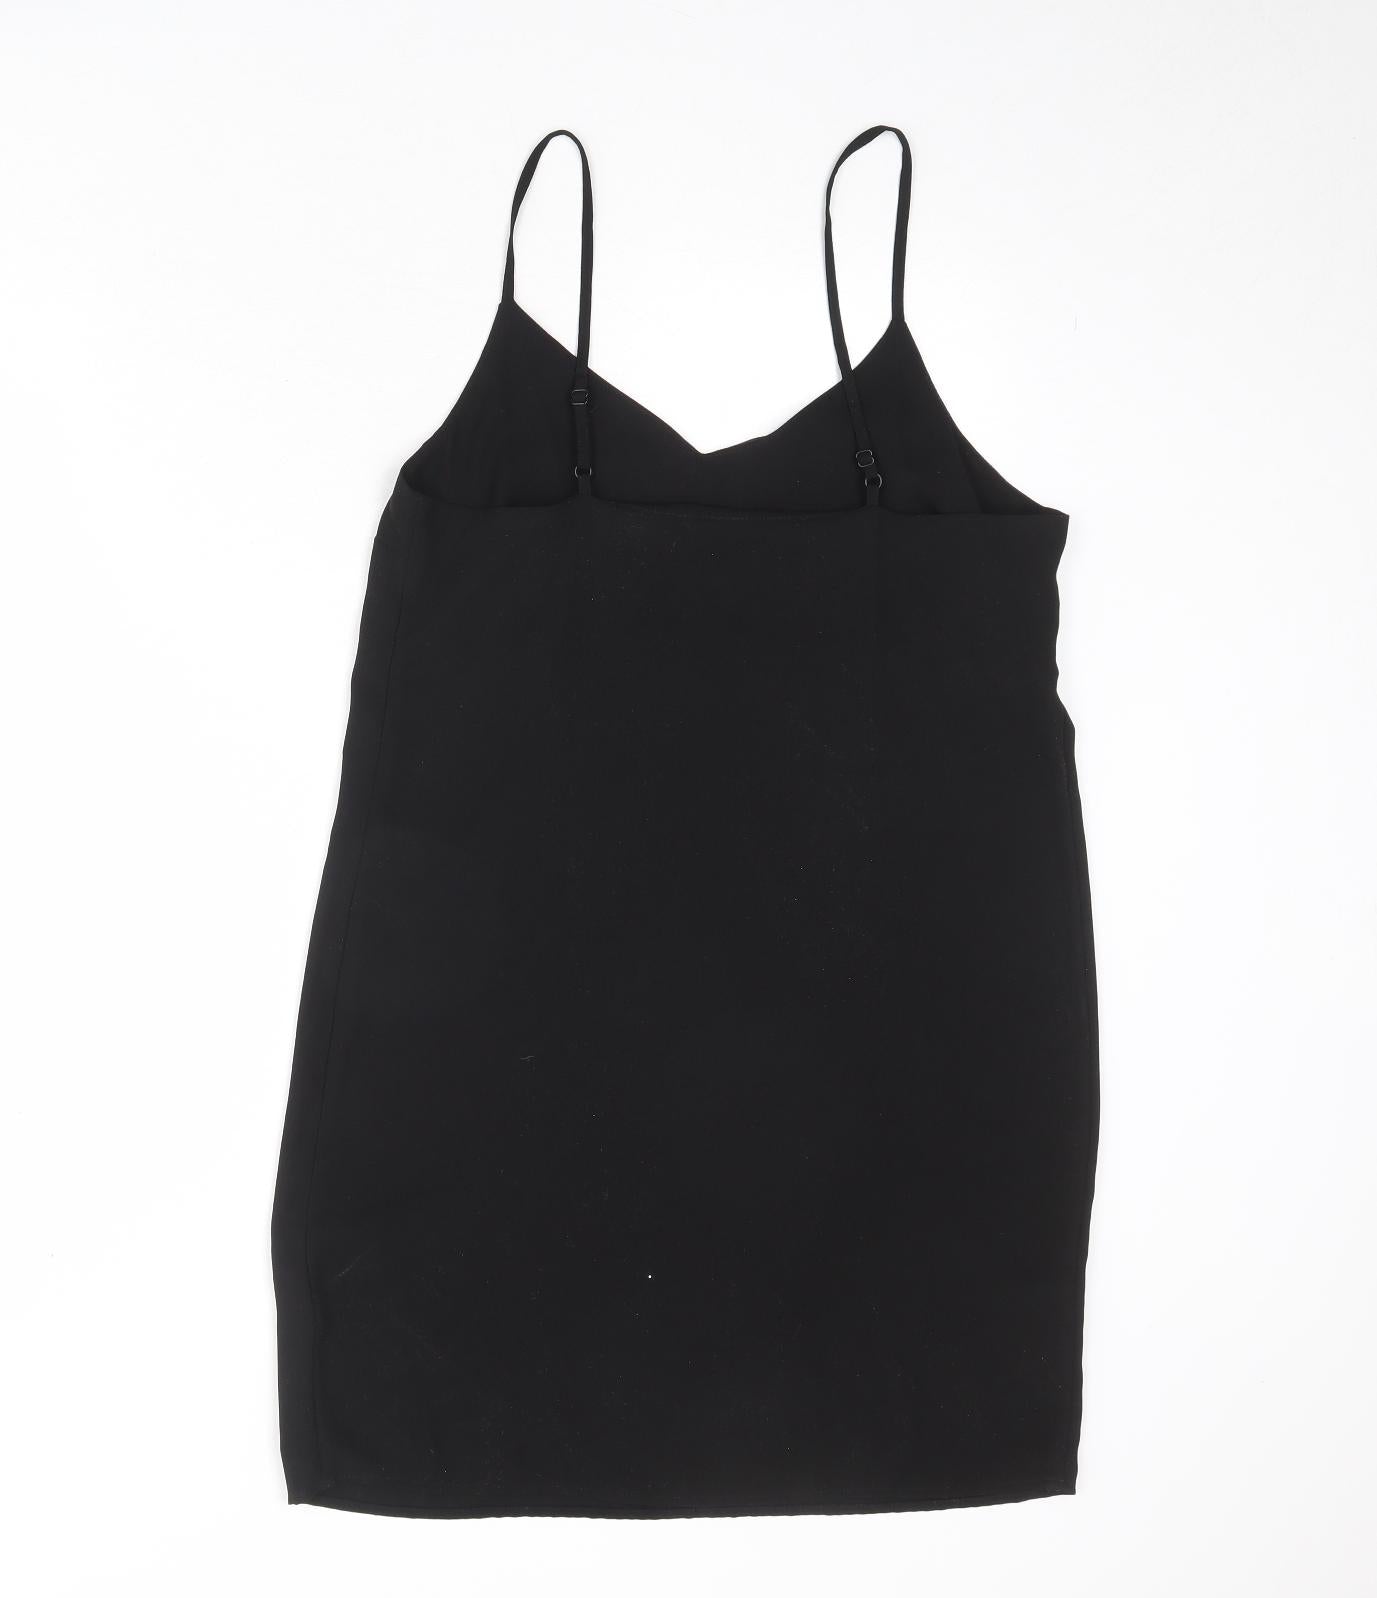 New Look Womens Black Polyester Tank Dress Size 10 V-Neck Pullover